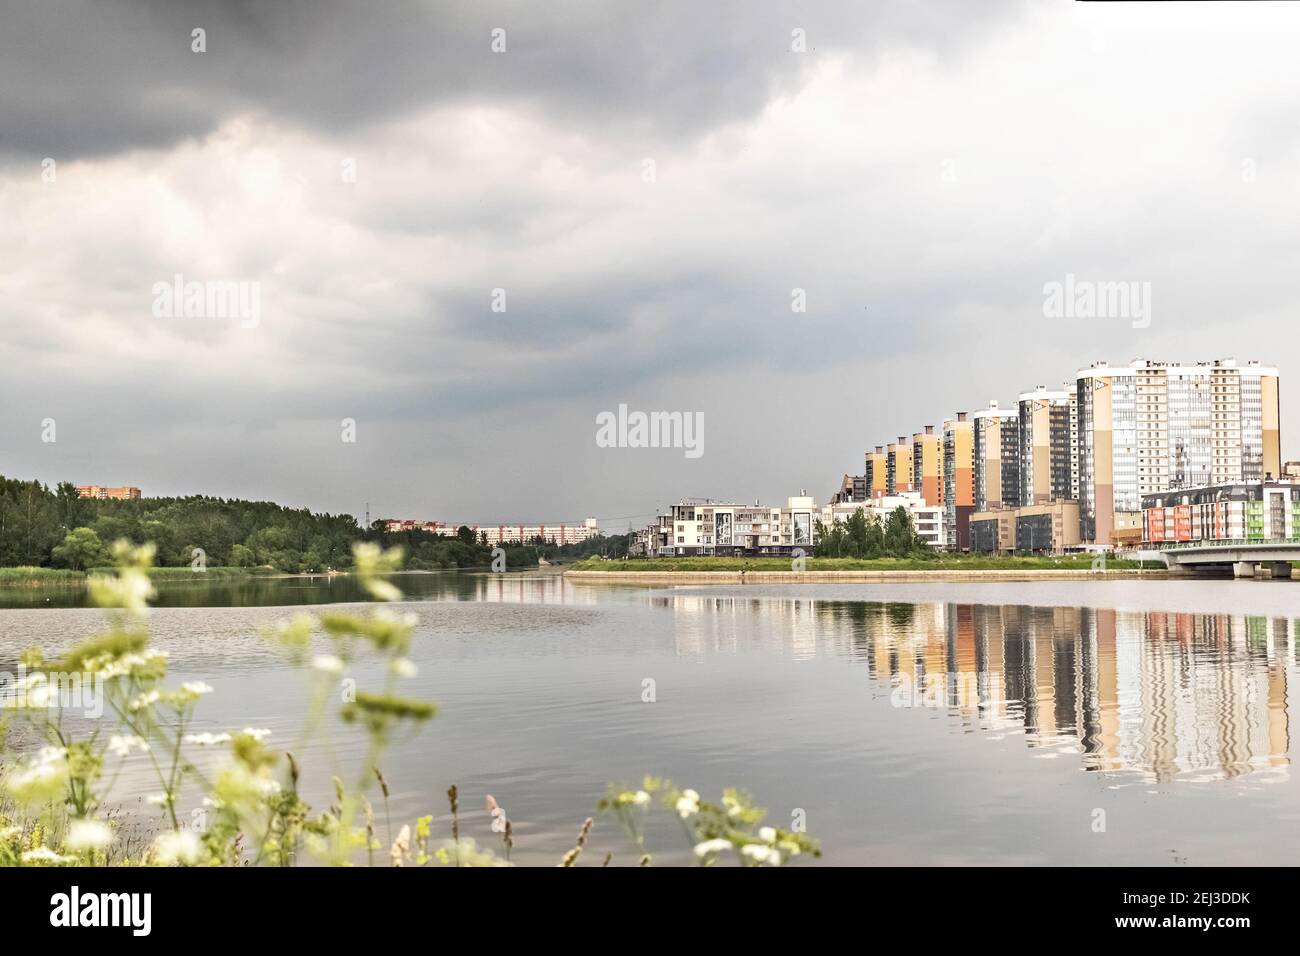 The coast of the Gulf of Finland with modern buildings. Island and parkland on the horizon. Stock Photo